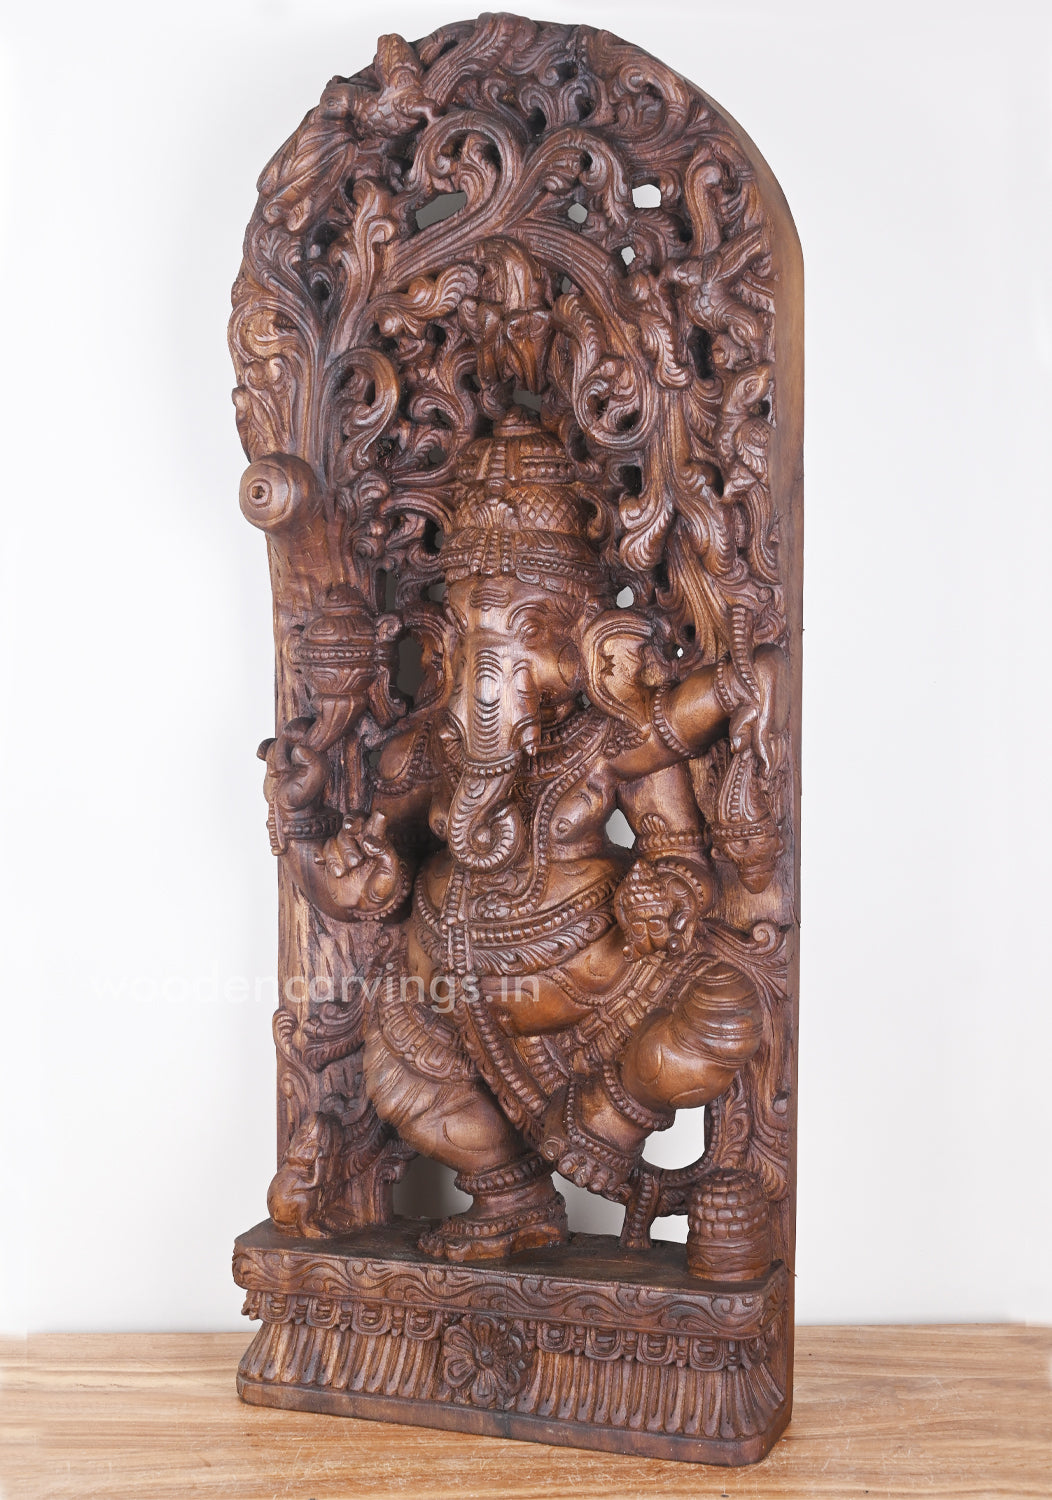 Different Hand Gesture of Ankusha Ganesha Standing on Base in dancing Posture Wooden Jali Work Wall Mount 36"